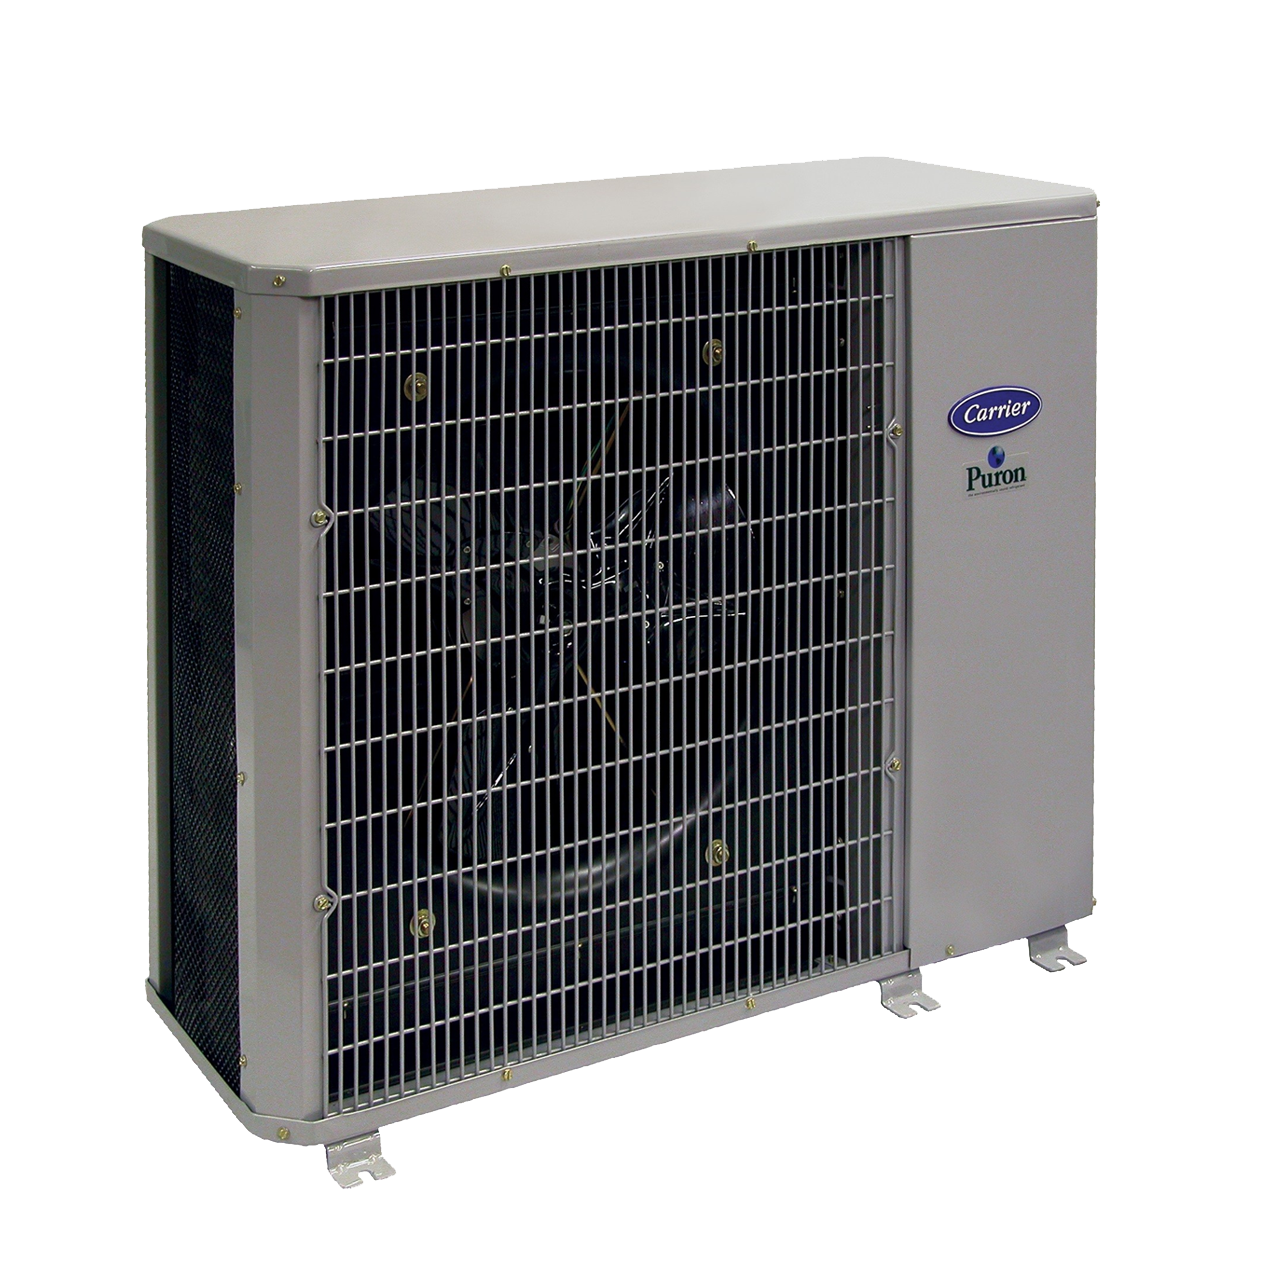 Performance 14 Compact Air Conditioner Unit 24AHA4 Carrier Home Comfort